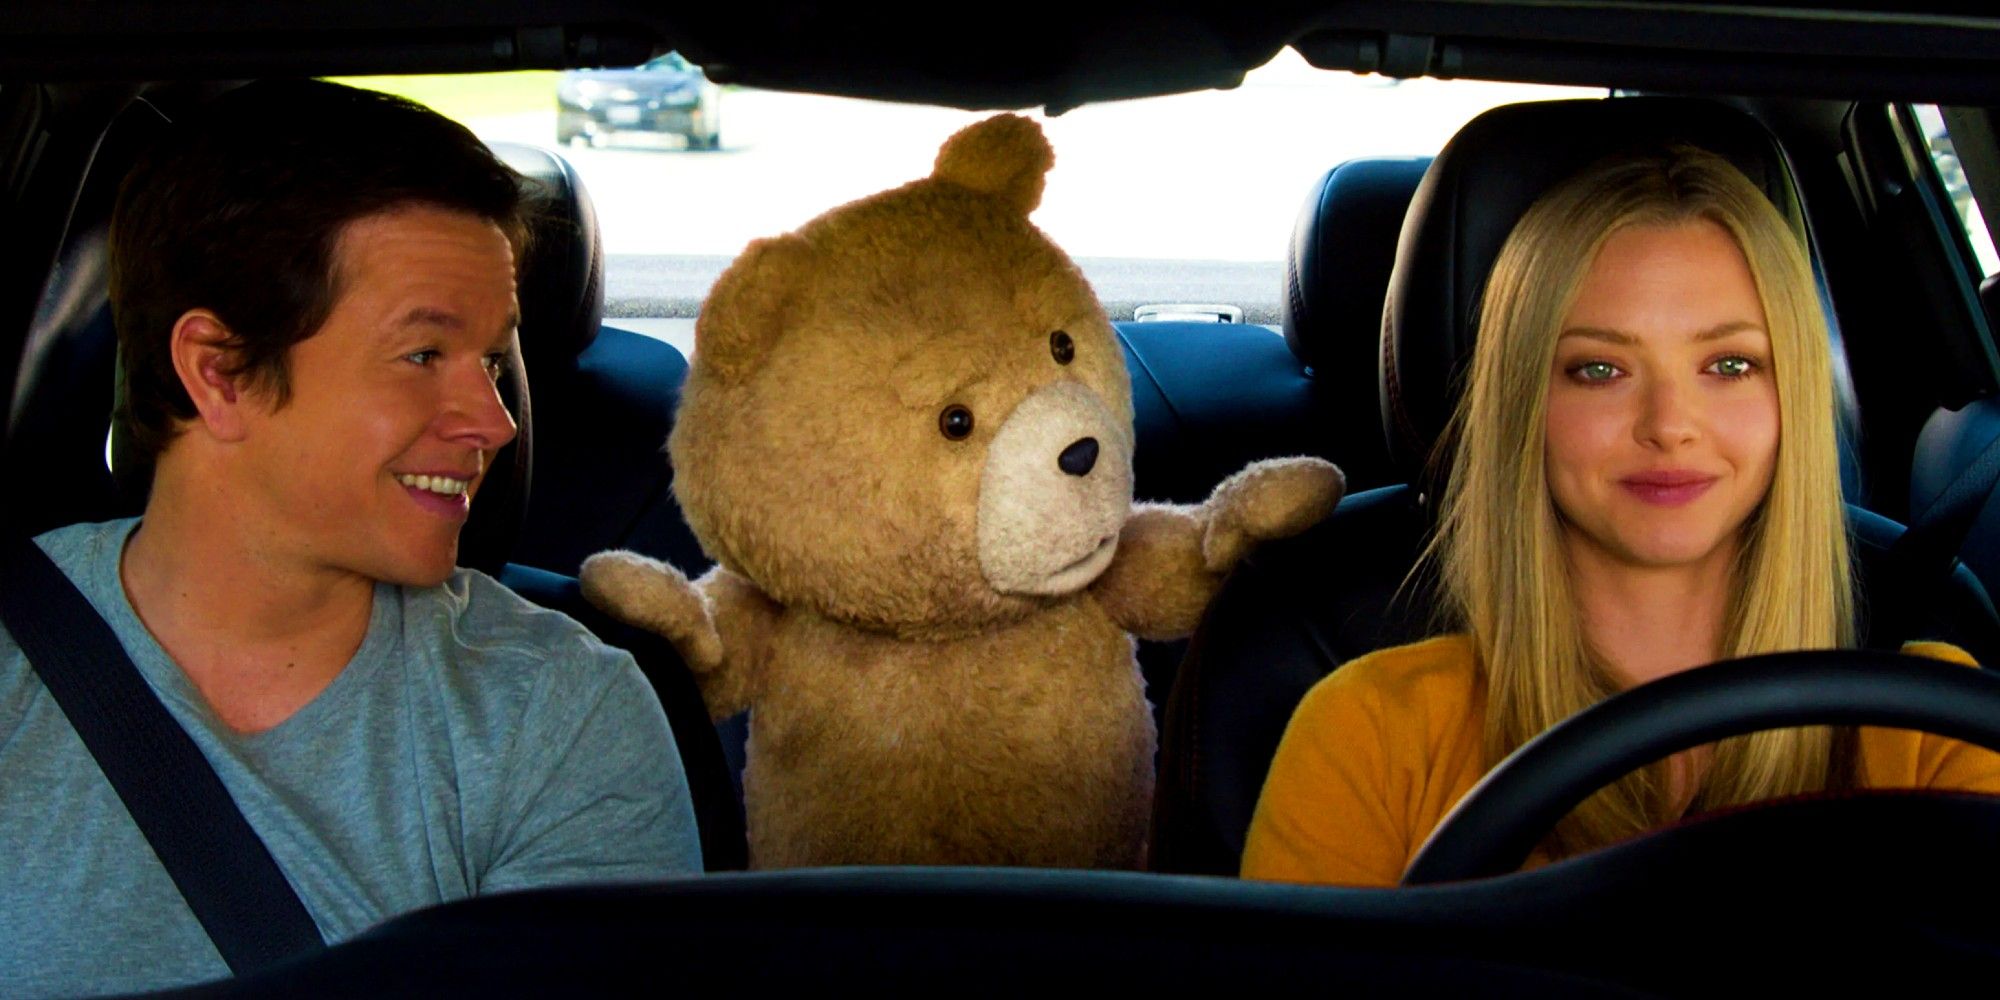 Samantha, Ted, and John in the car in Ted 2 